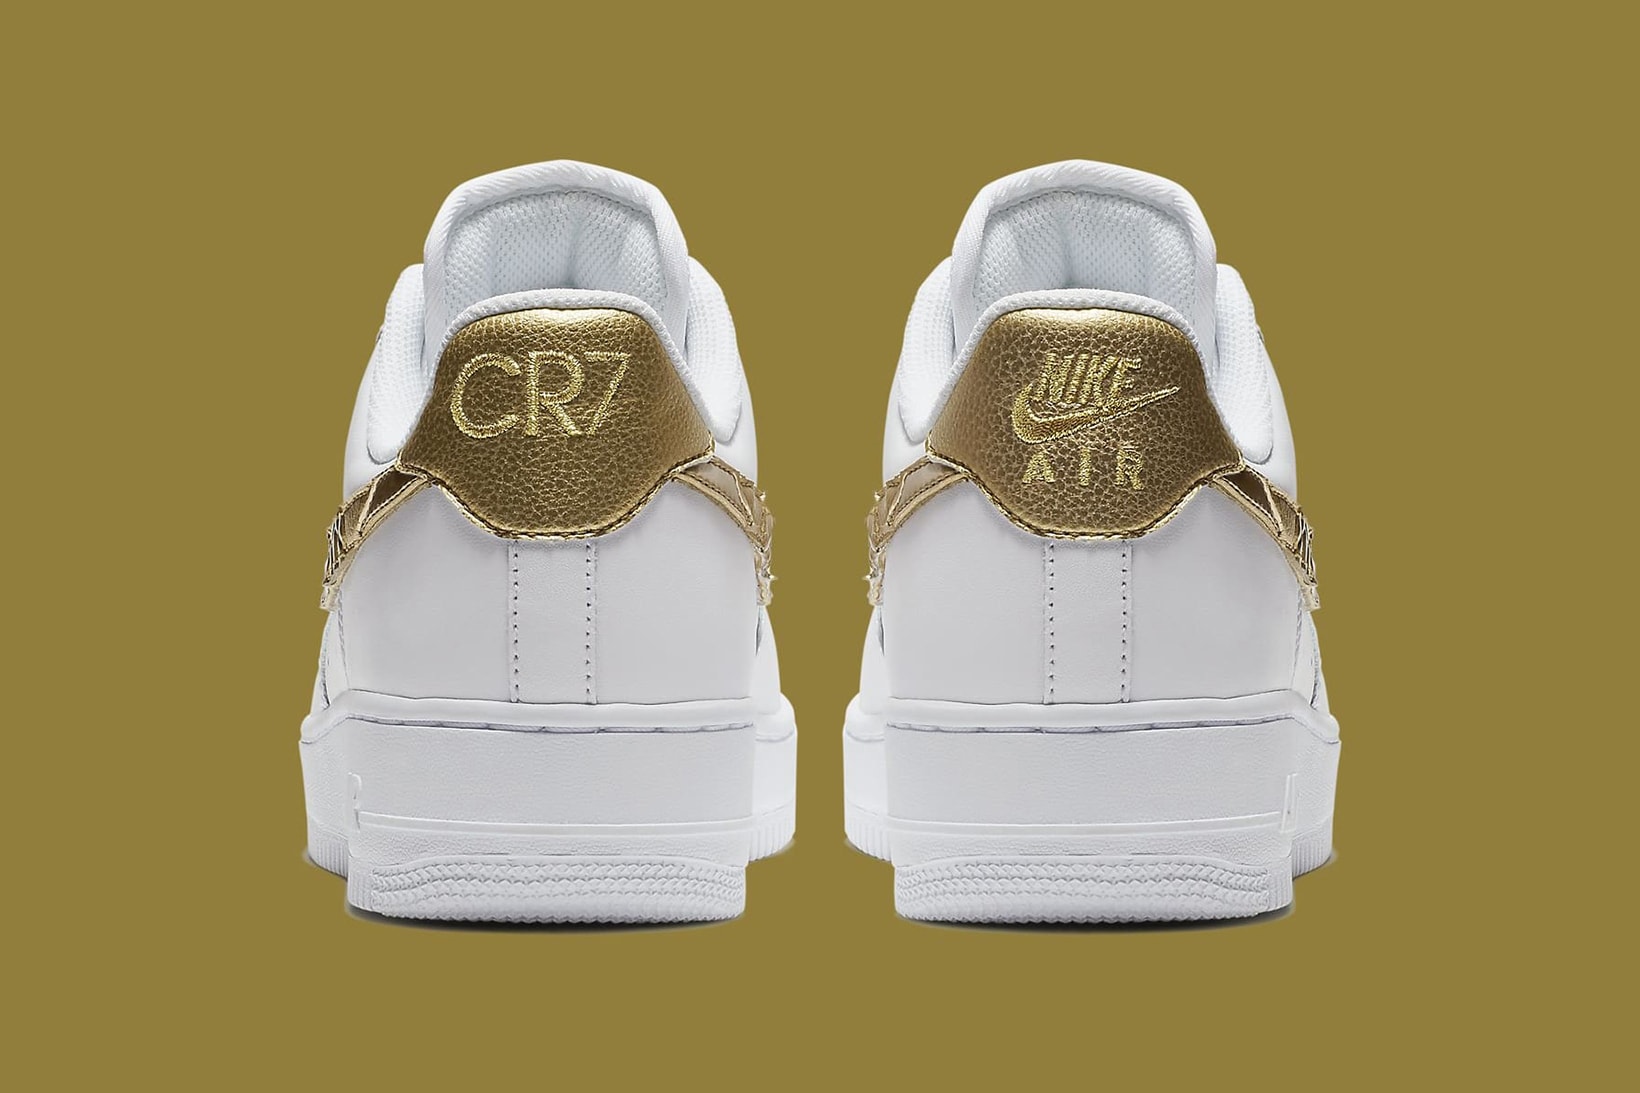 Nike Air Force 1 Low CR7 Golden Patchwork Releasing This Week